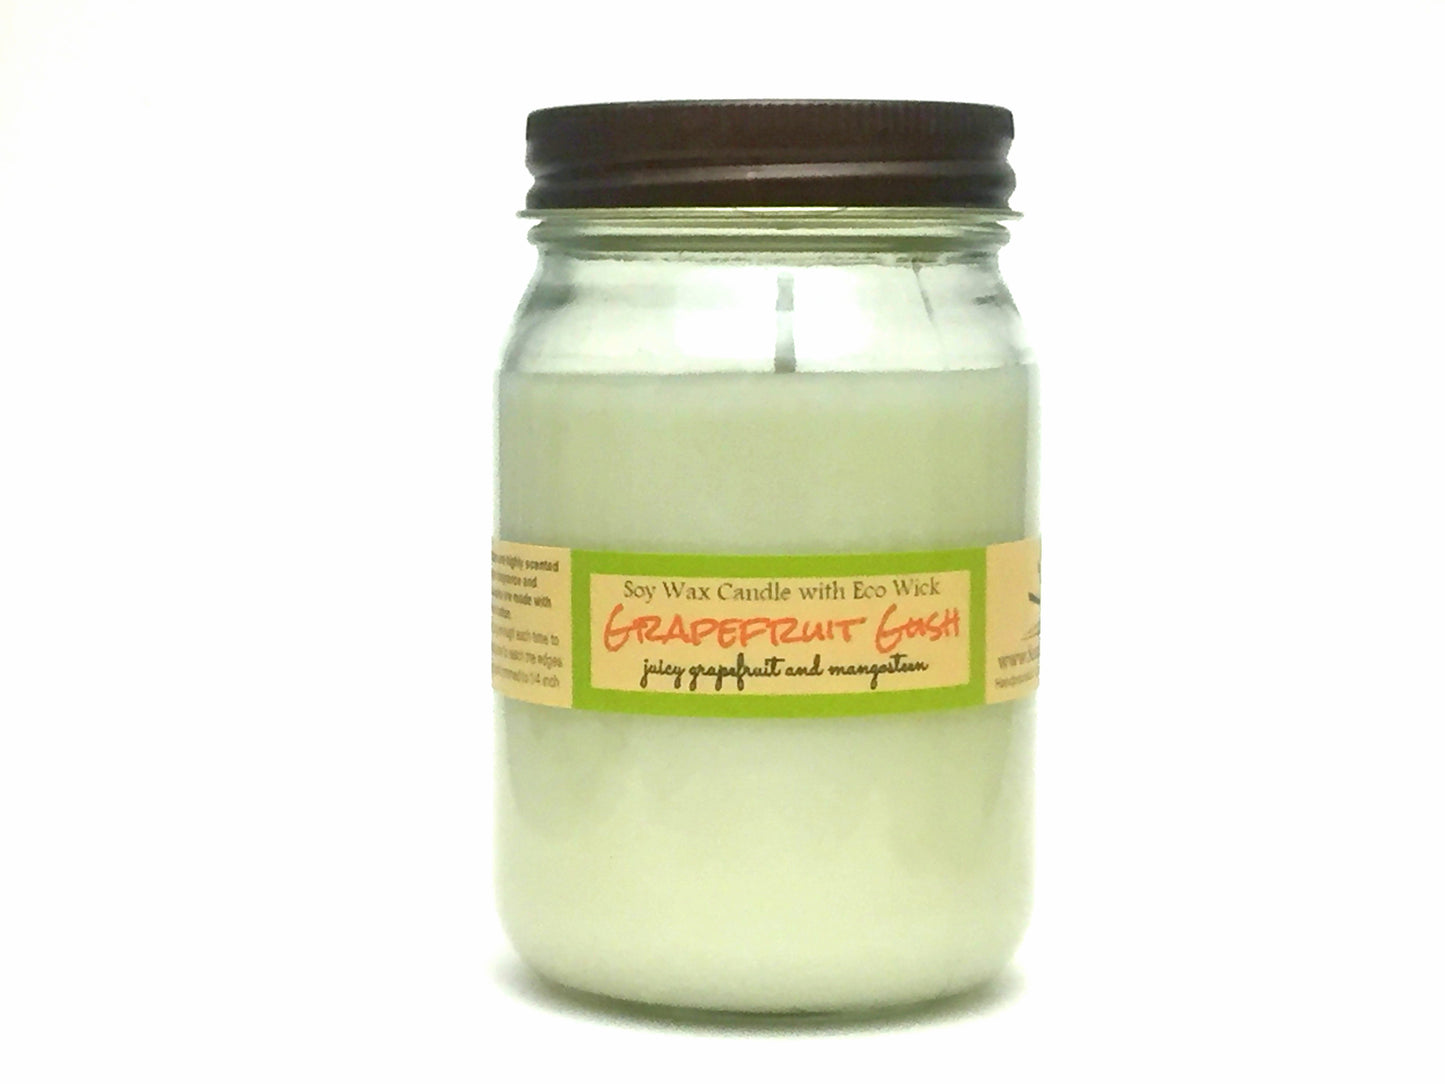 Grapefruit Gush Scented Soy Wax Candle